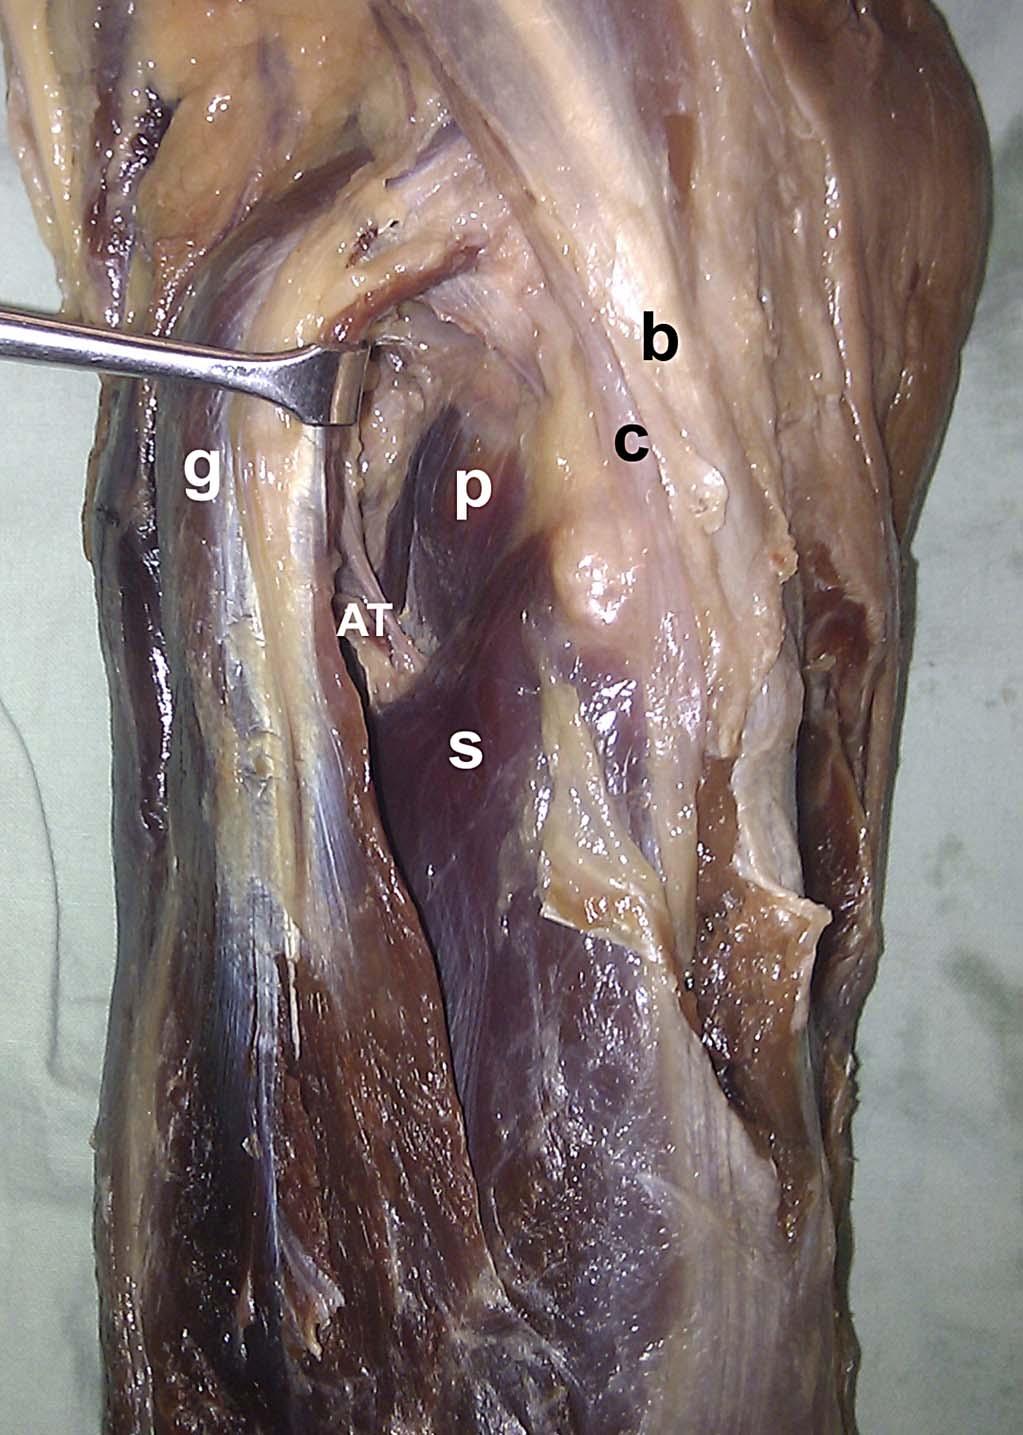 J Orthop Trauma Volume 27, Number 4, April 2013 Risk of Injury to the Anterior Tibial Artery FIGURE 3.